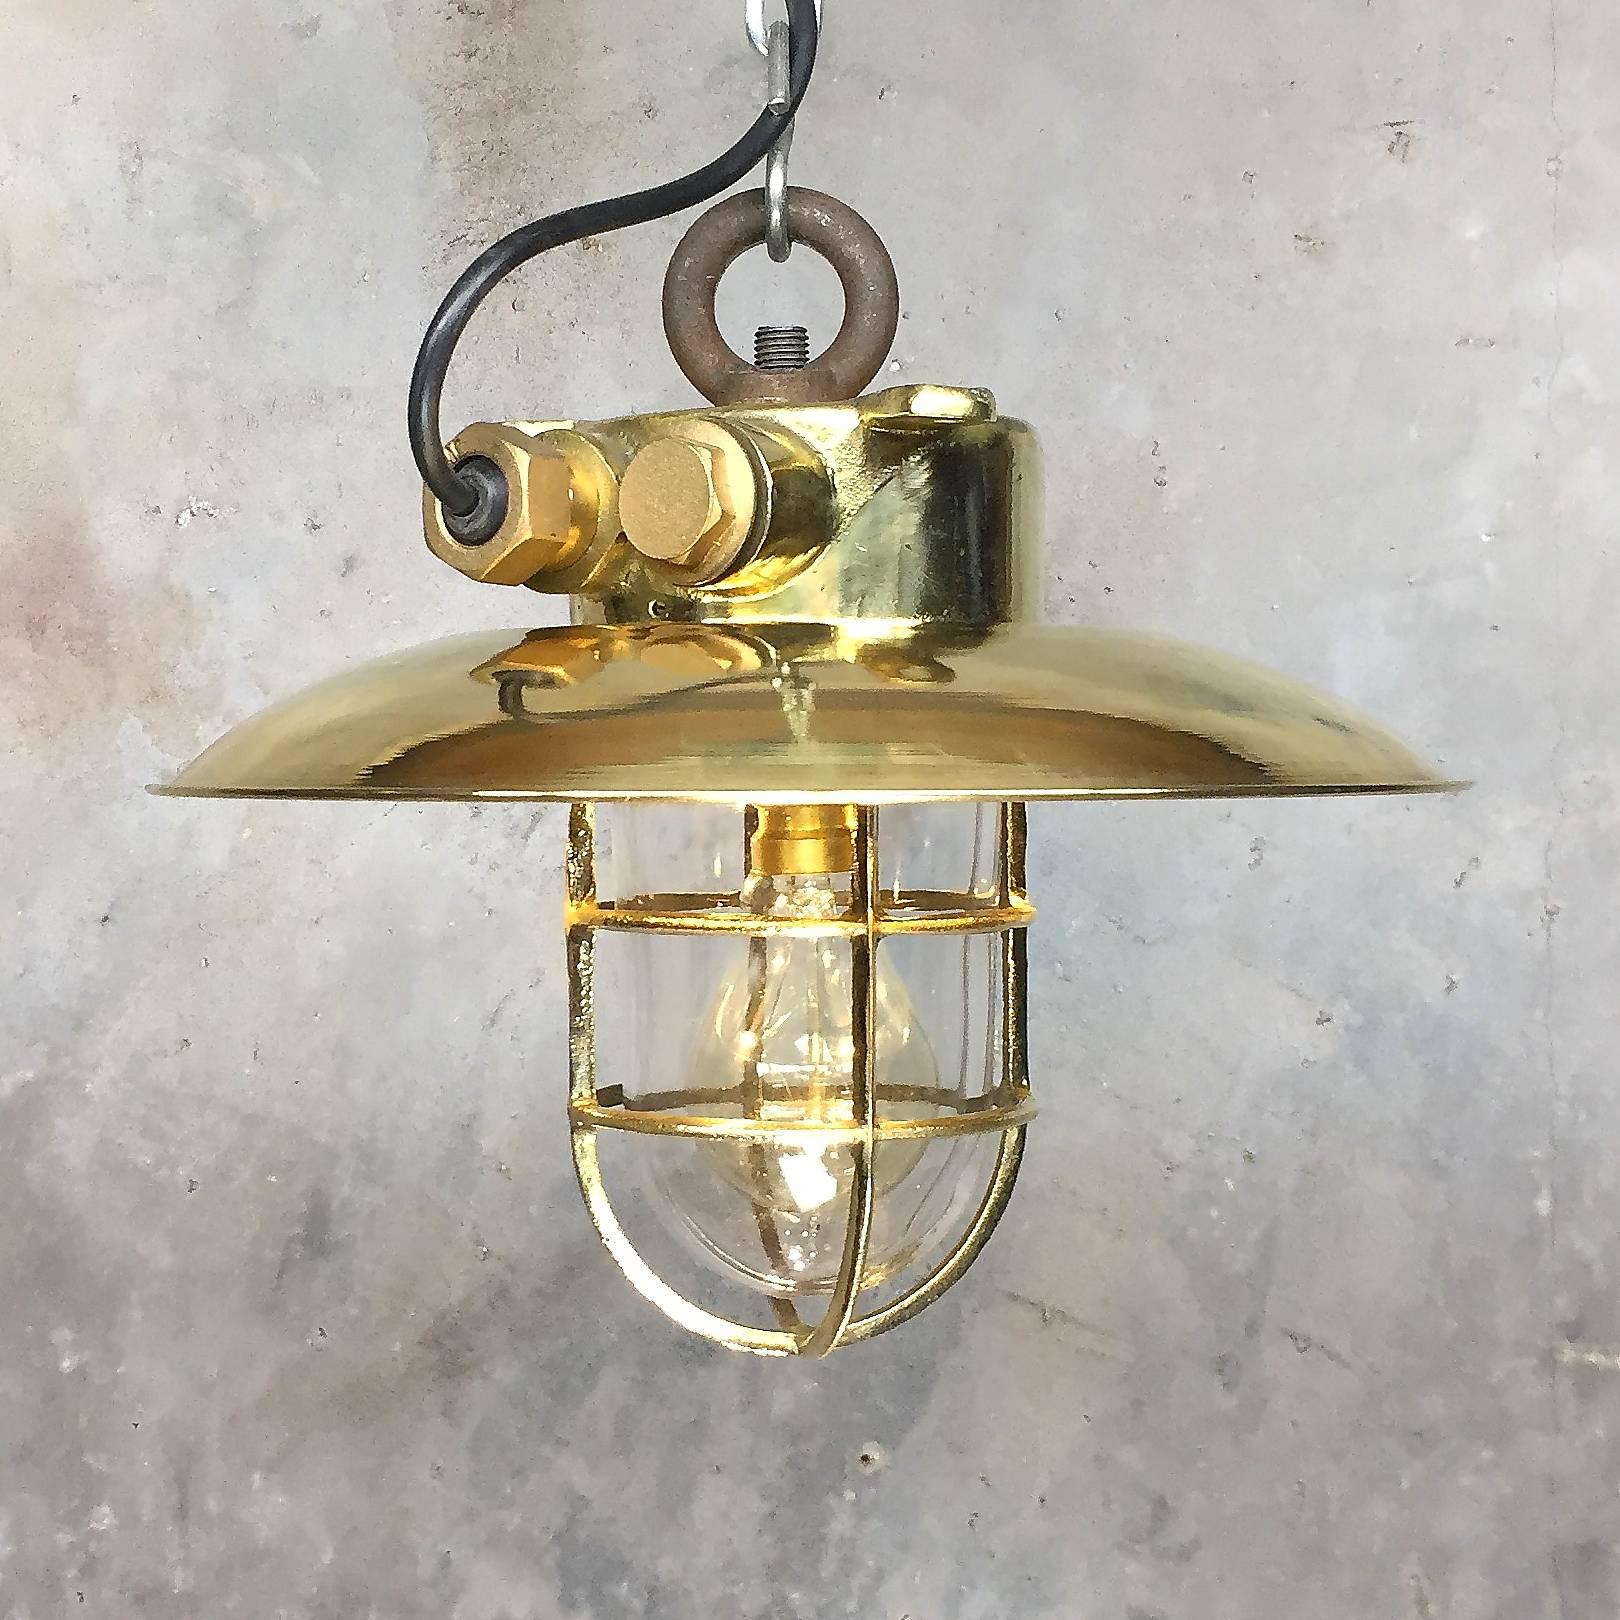 Industrial Mid-Late 20th Century Brass Explosion Proof Pendant Brass Shade and Glass Dome For Sale